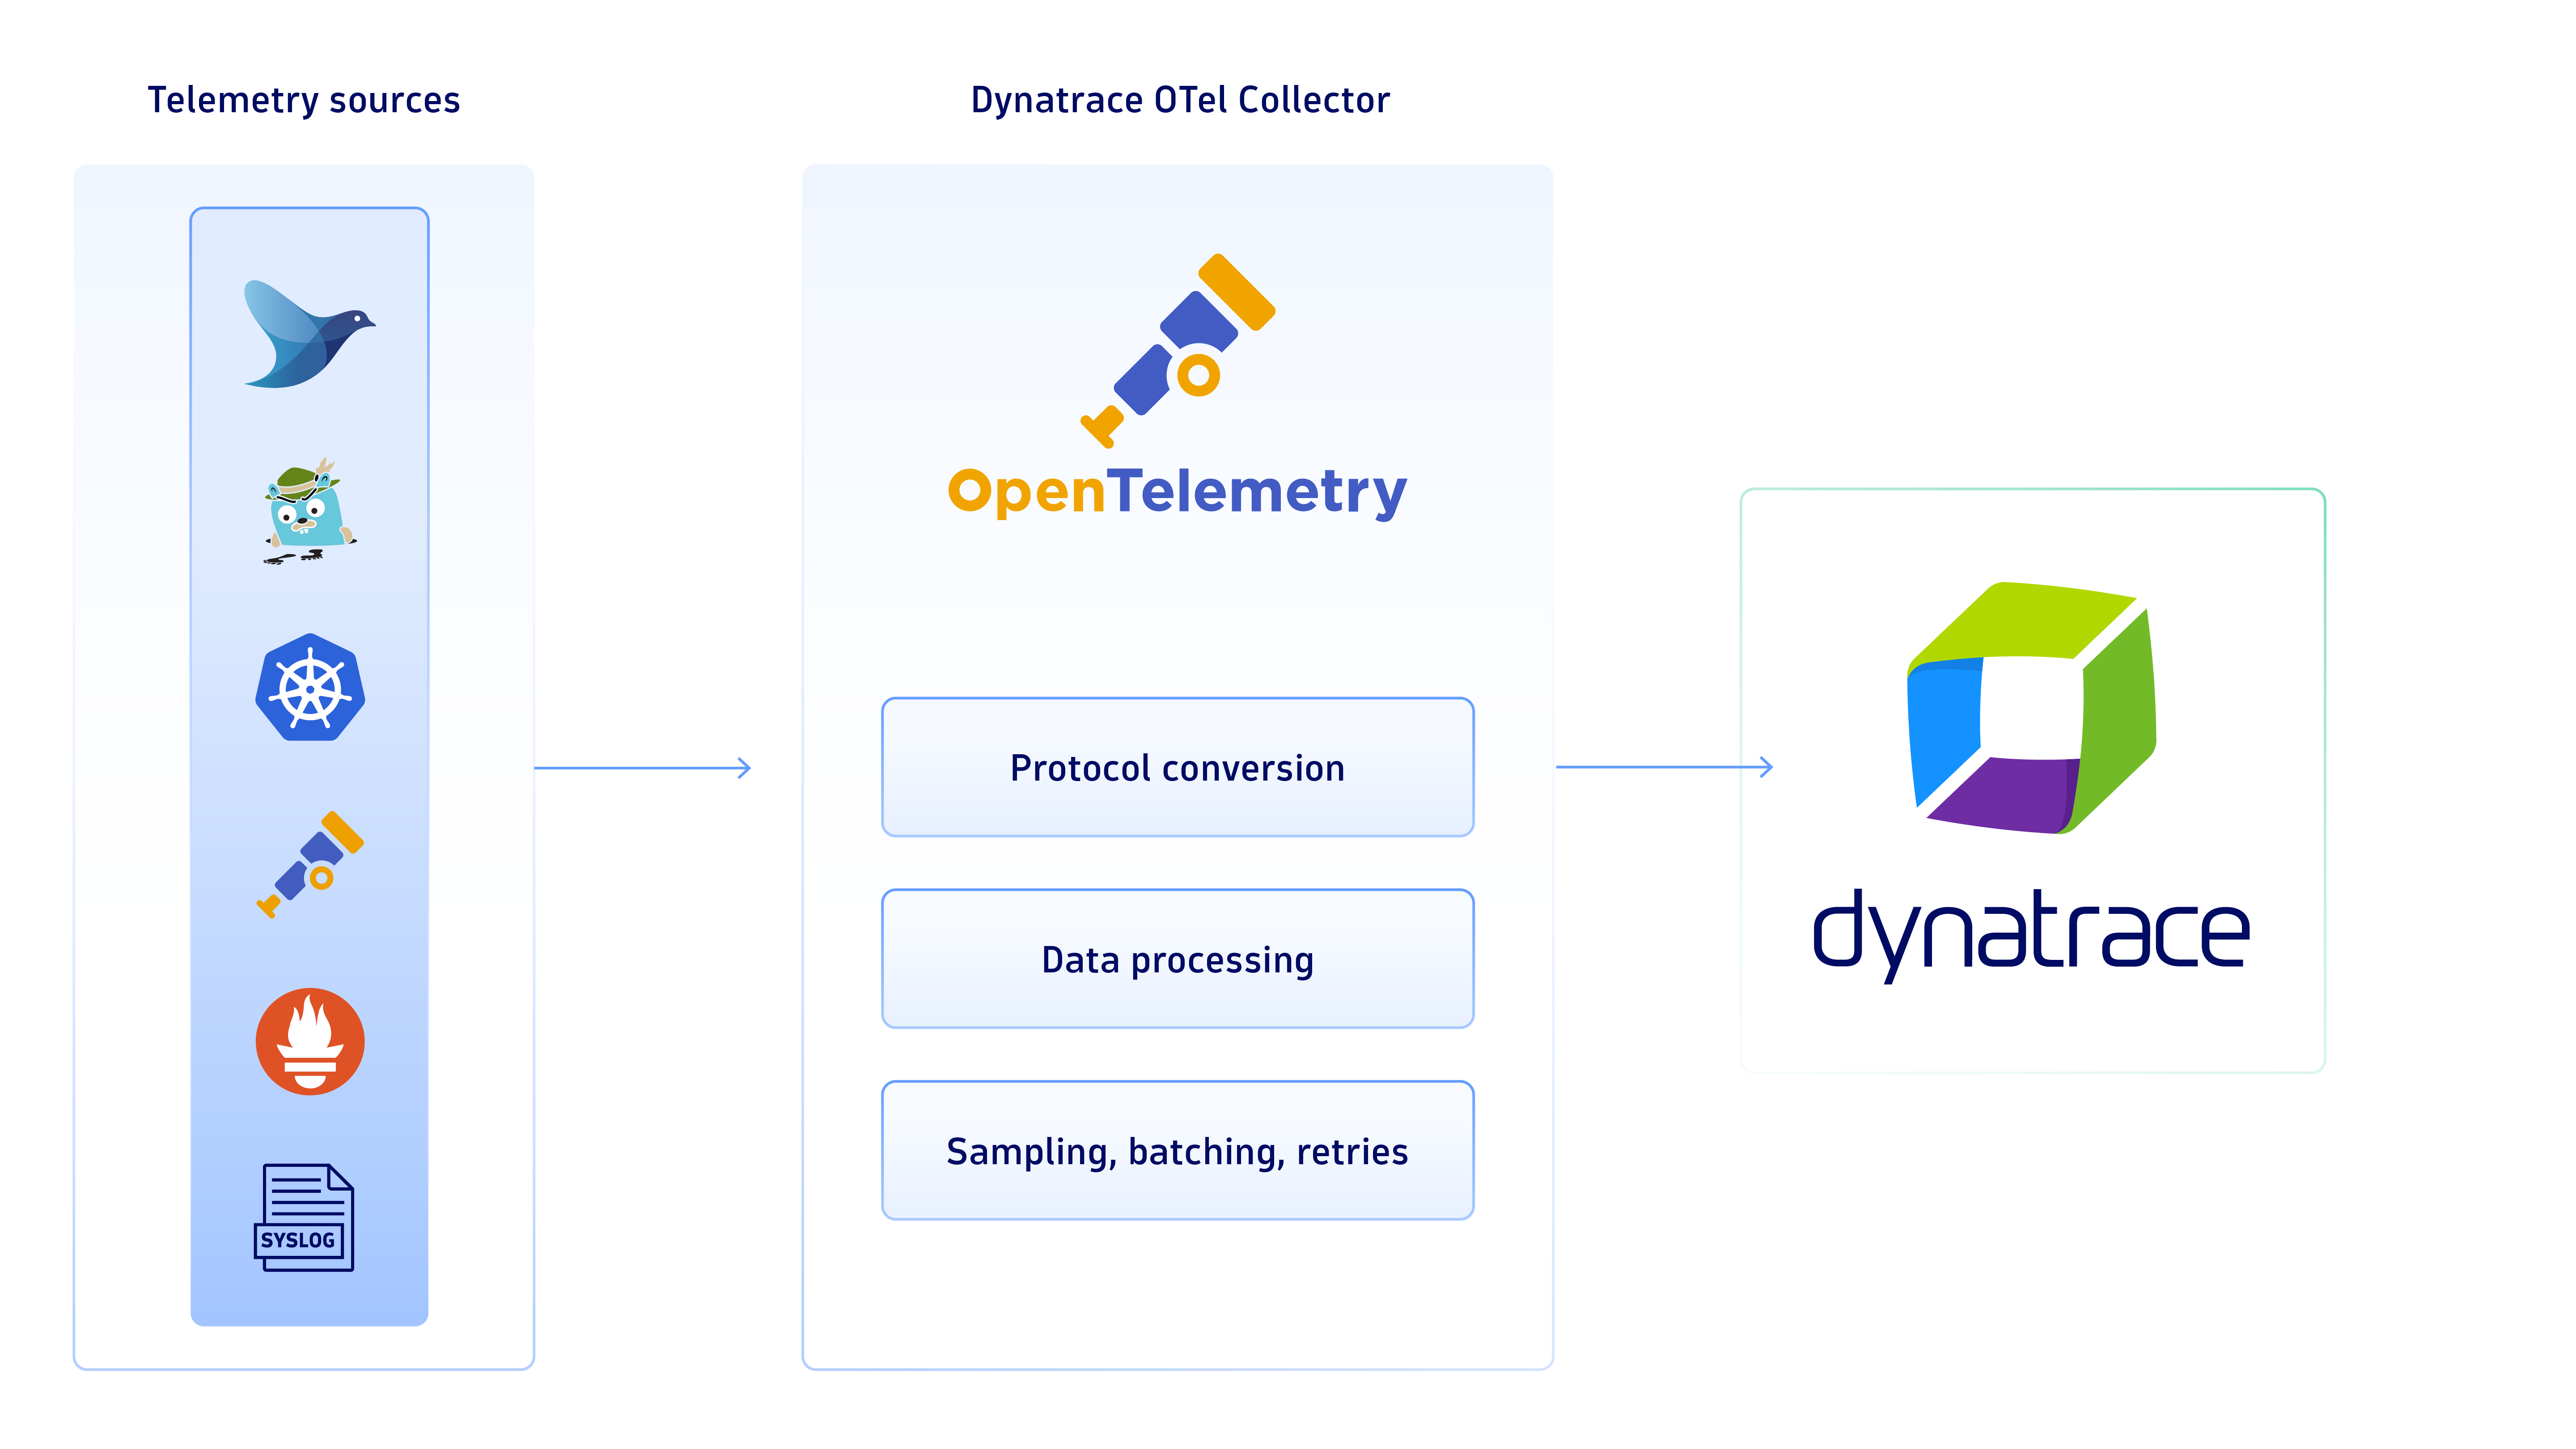 Dynatrace OTel Collector diagram with telemetry sources